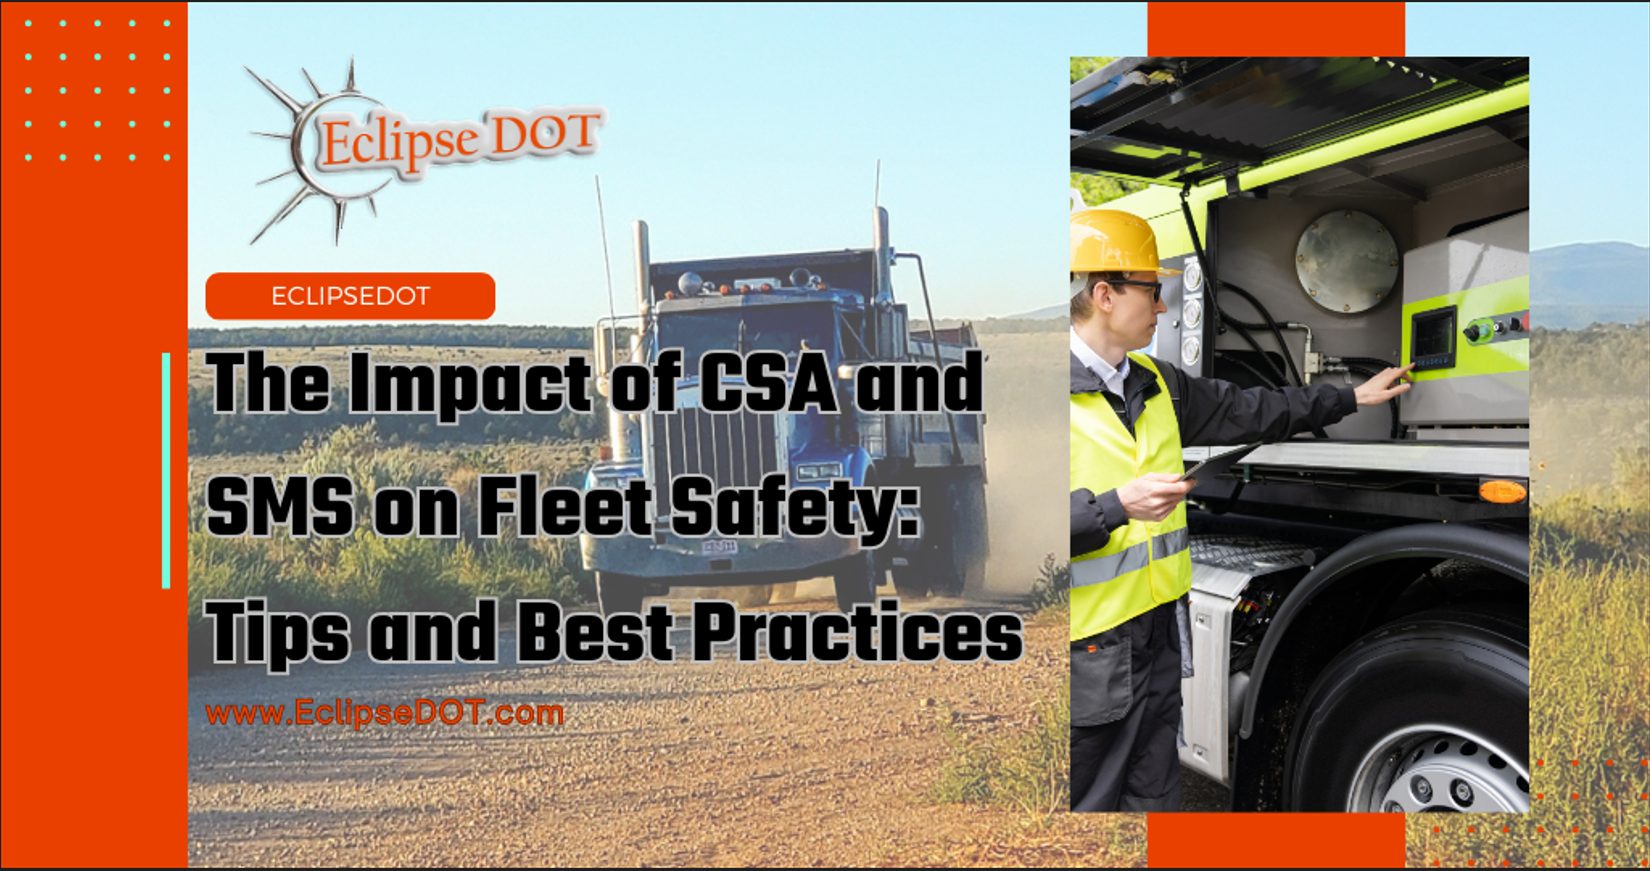 The Impact of CSA and SMS on Fleet Safety: Tips and Best Practices